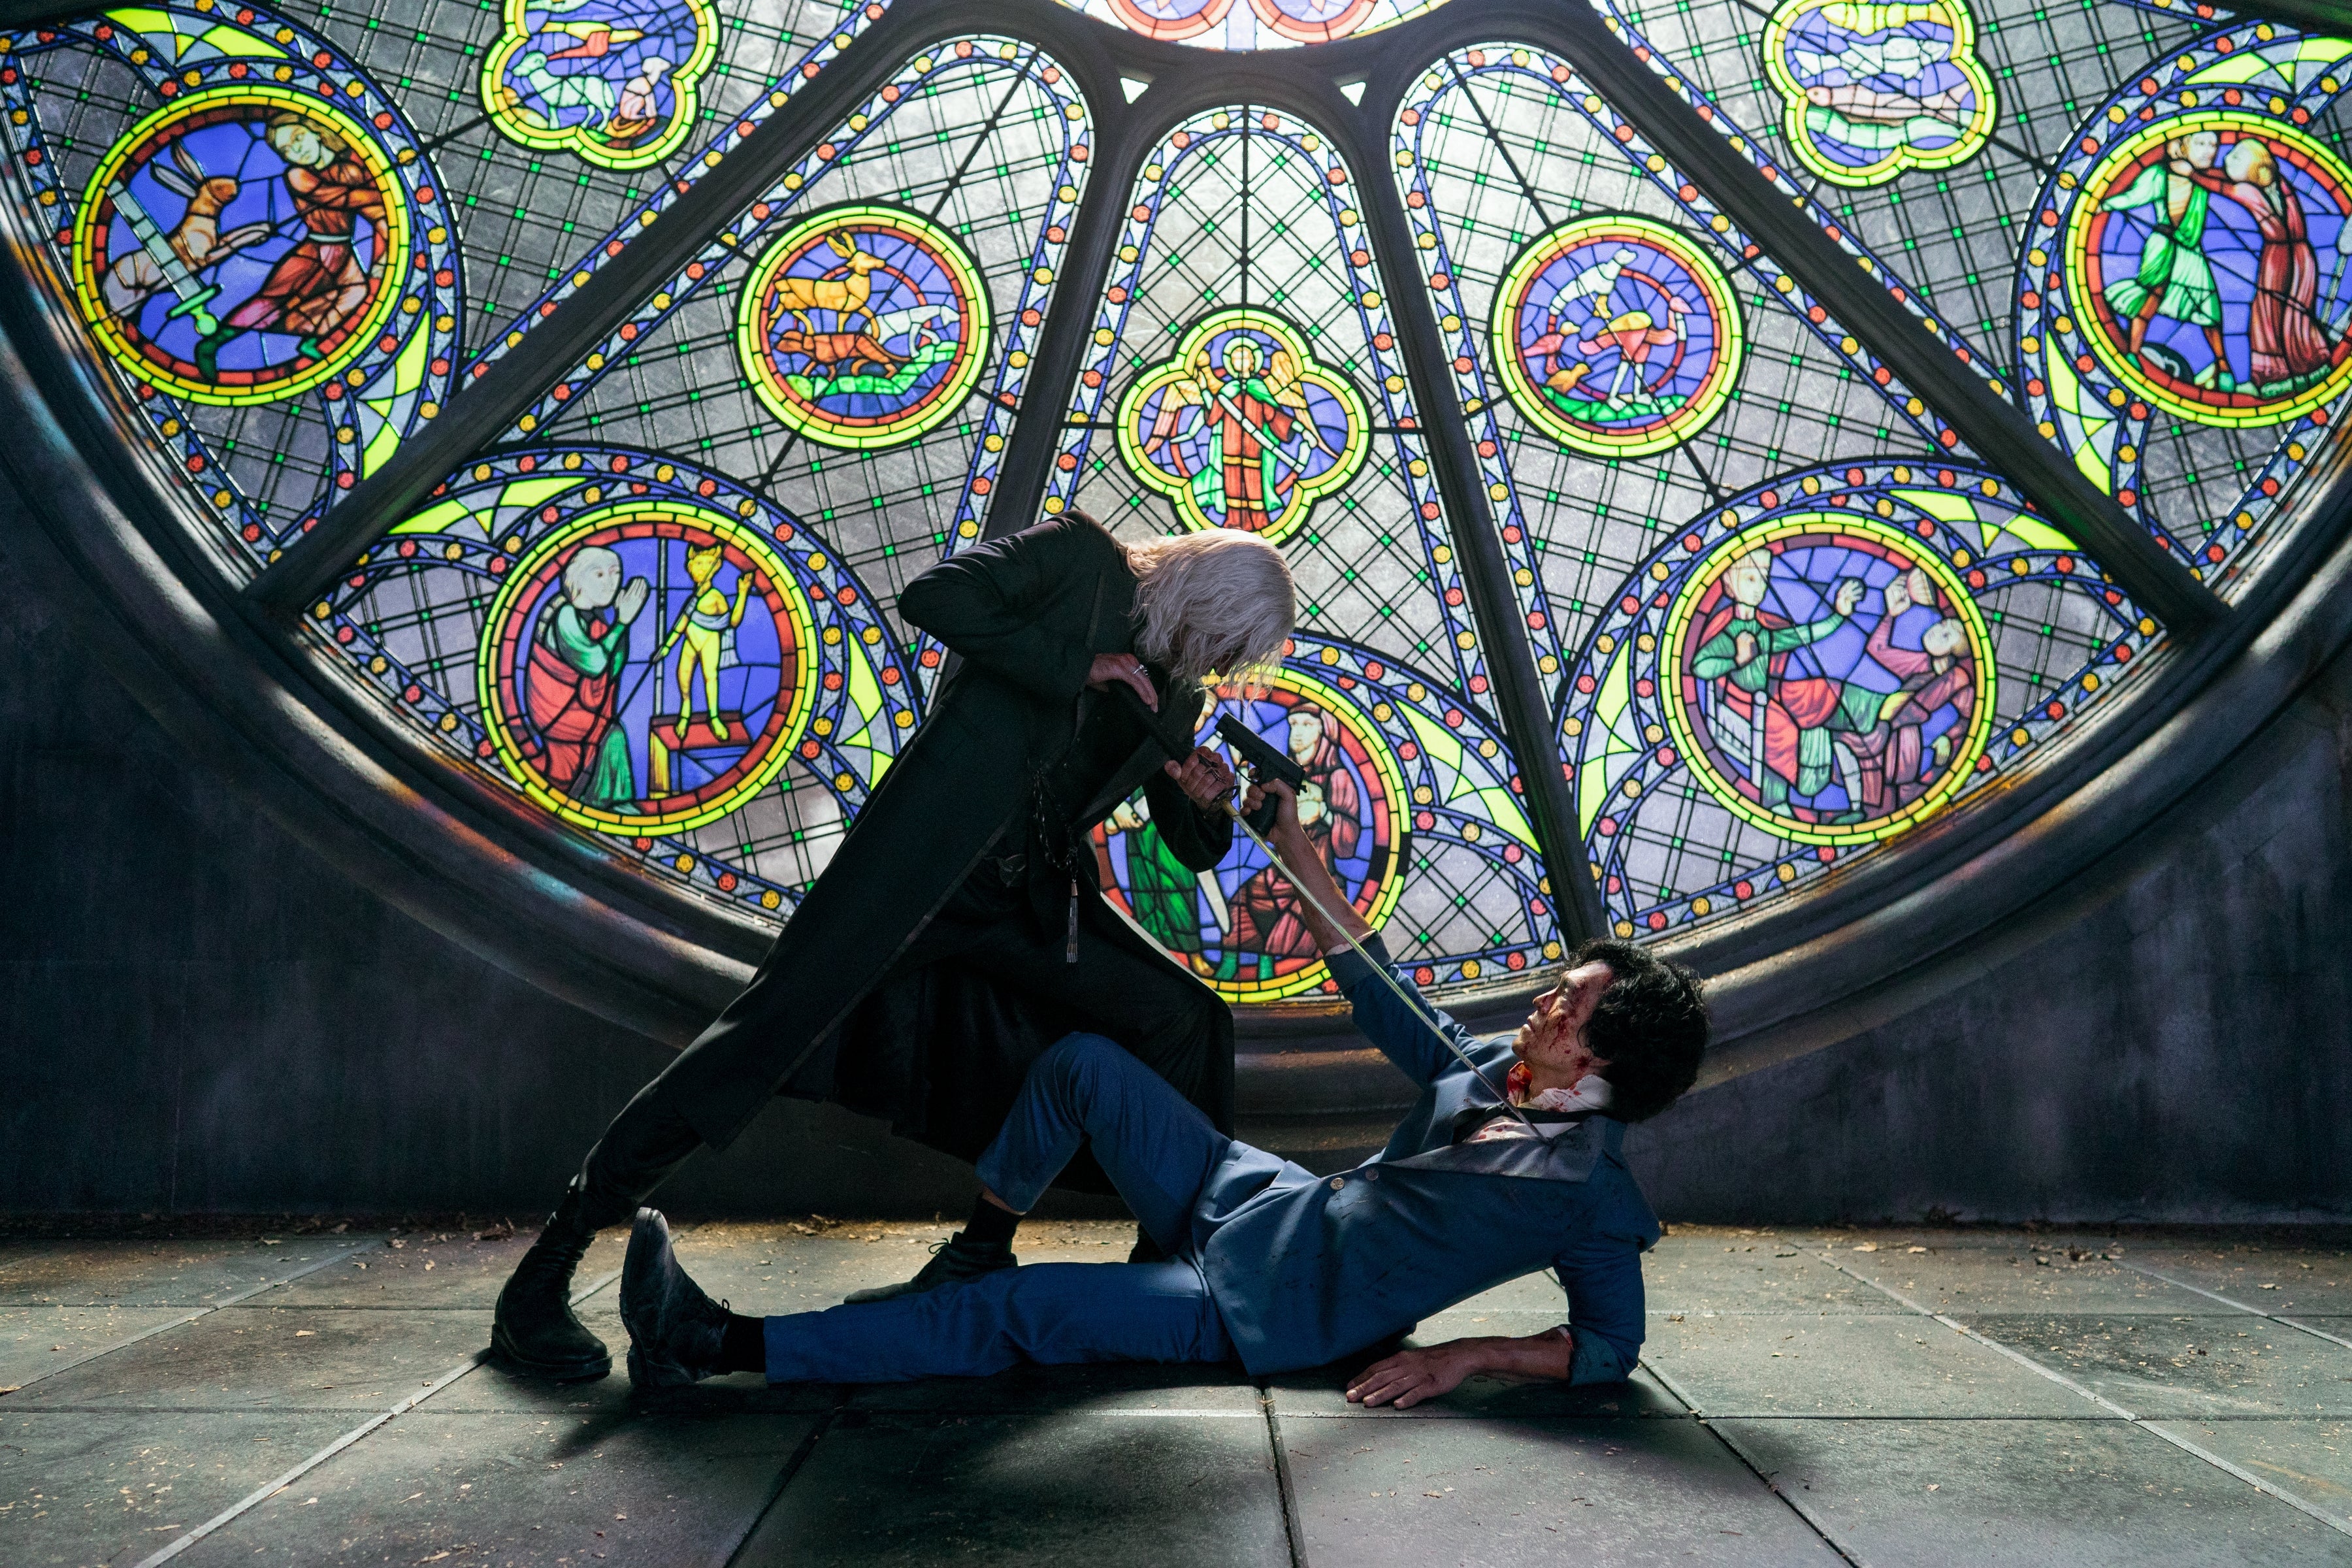 One man hunches over and holds a sword to the neck of a man lying on the ground who is pointing a gun up at him. Behind them is a huge stained glass window.